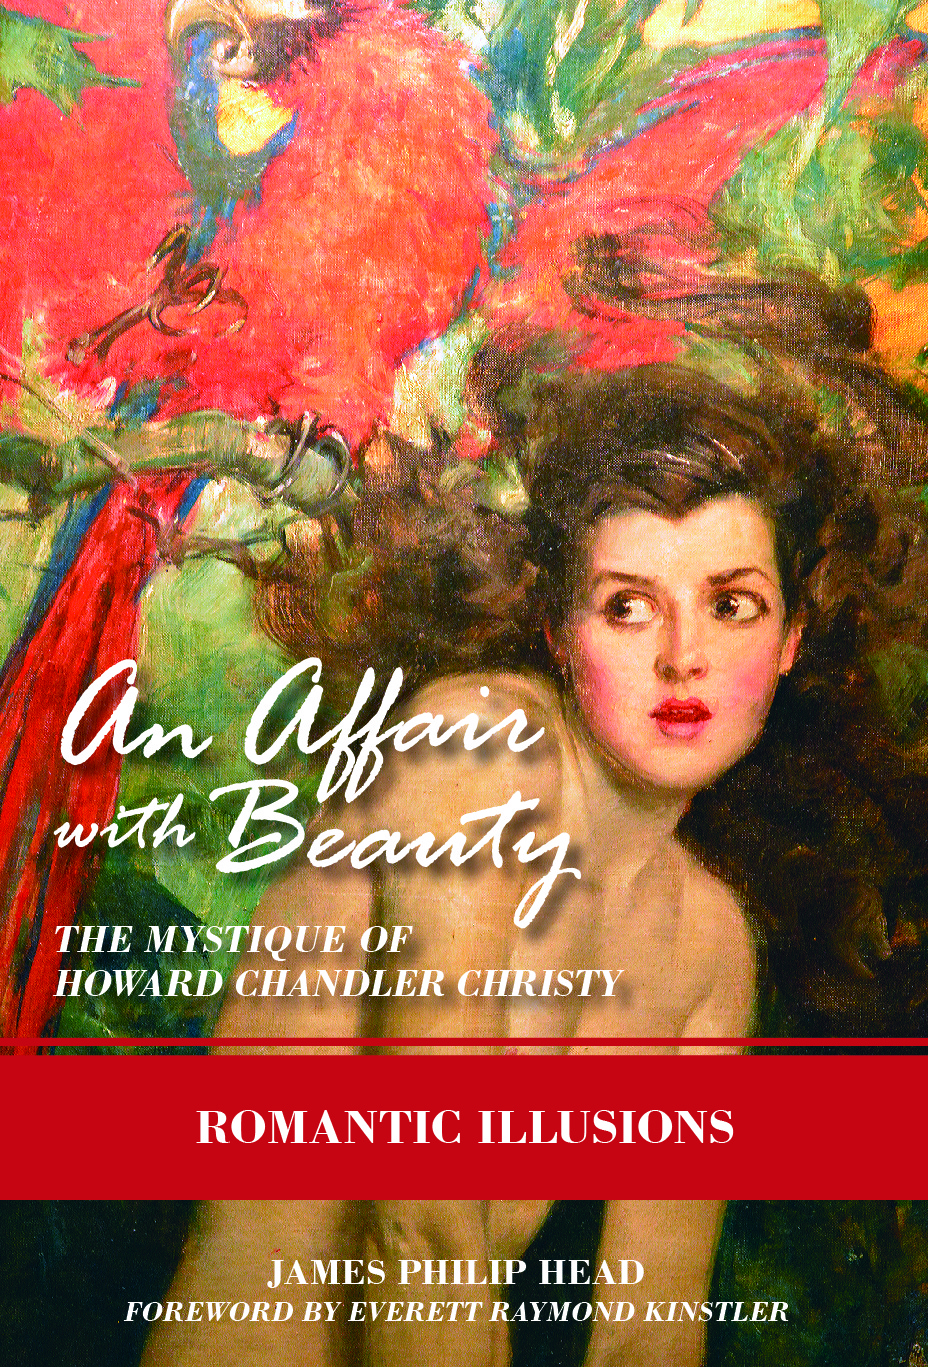 Romantic Illusions is the second book in the trilogy, An Affair With Beauty by James Philip Head